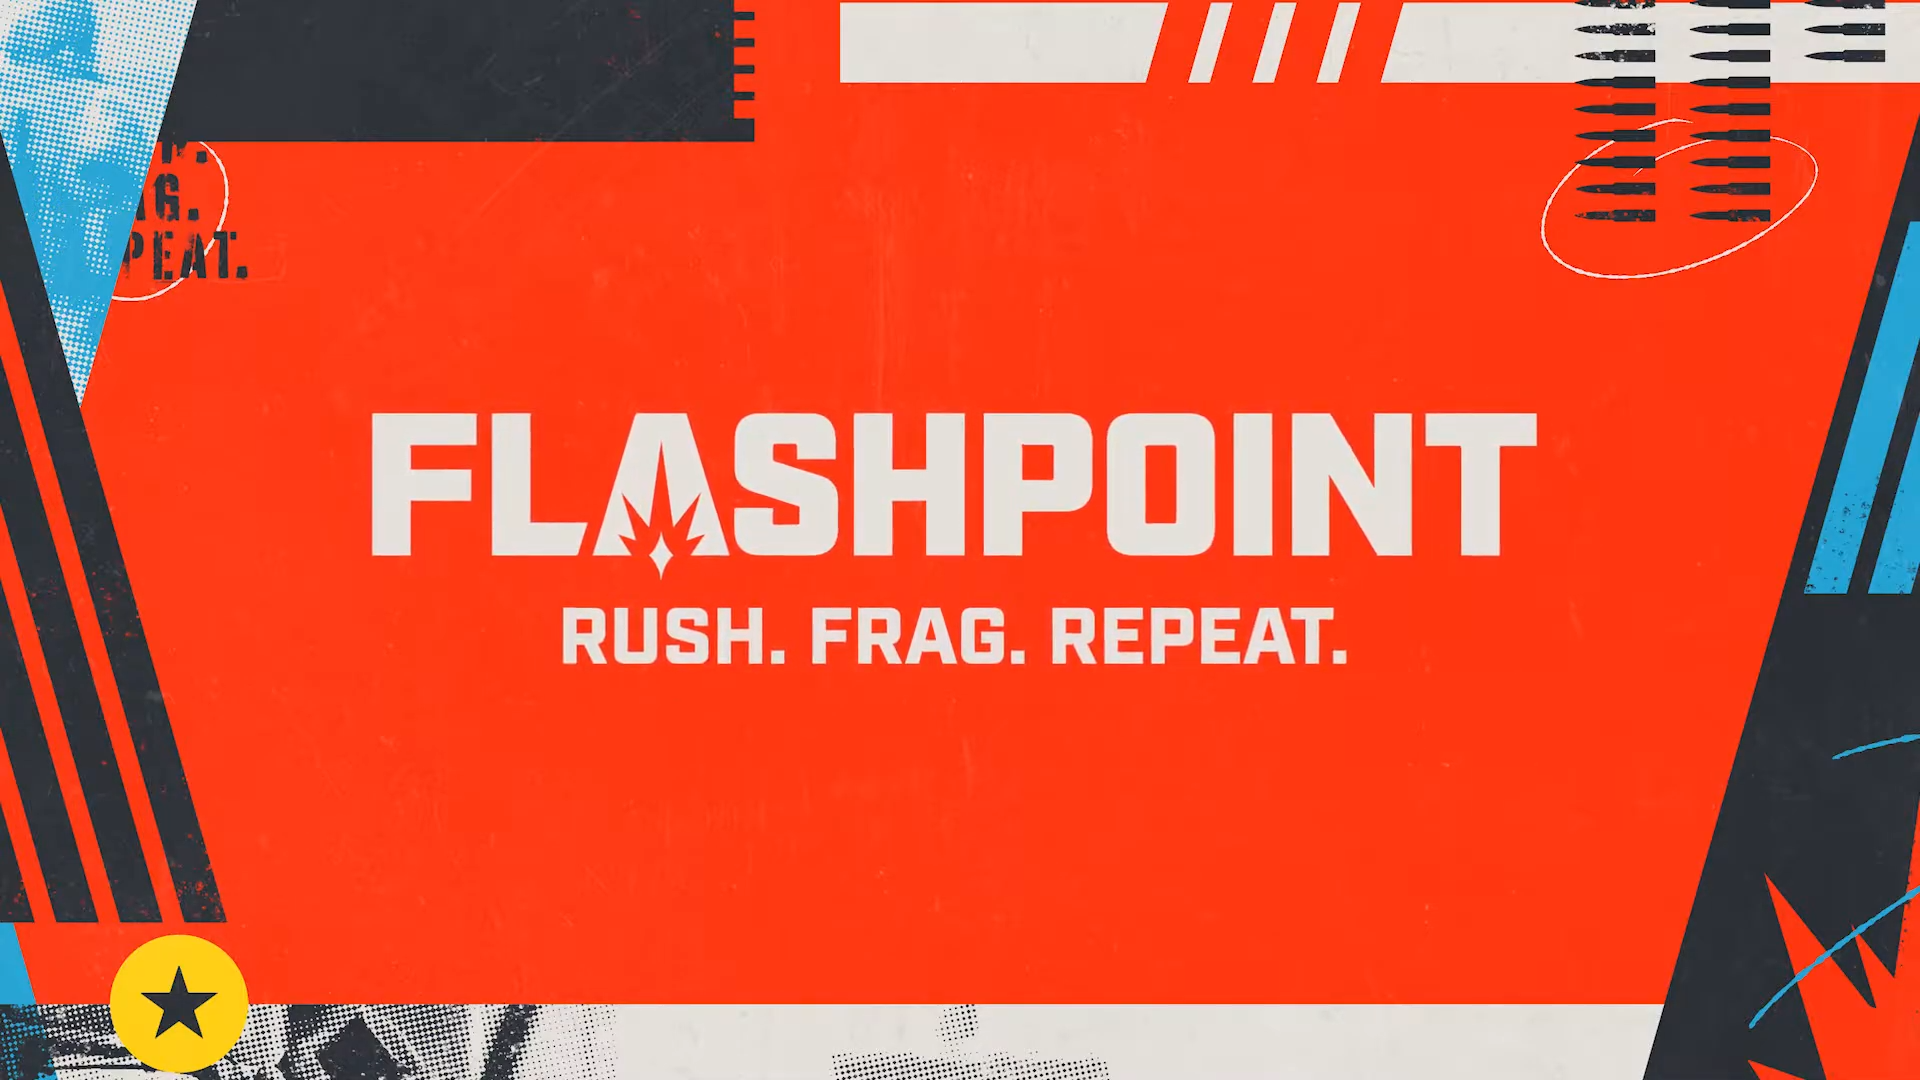 FLASHPOINT cancels Stockholm playoffs, LA to host instead